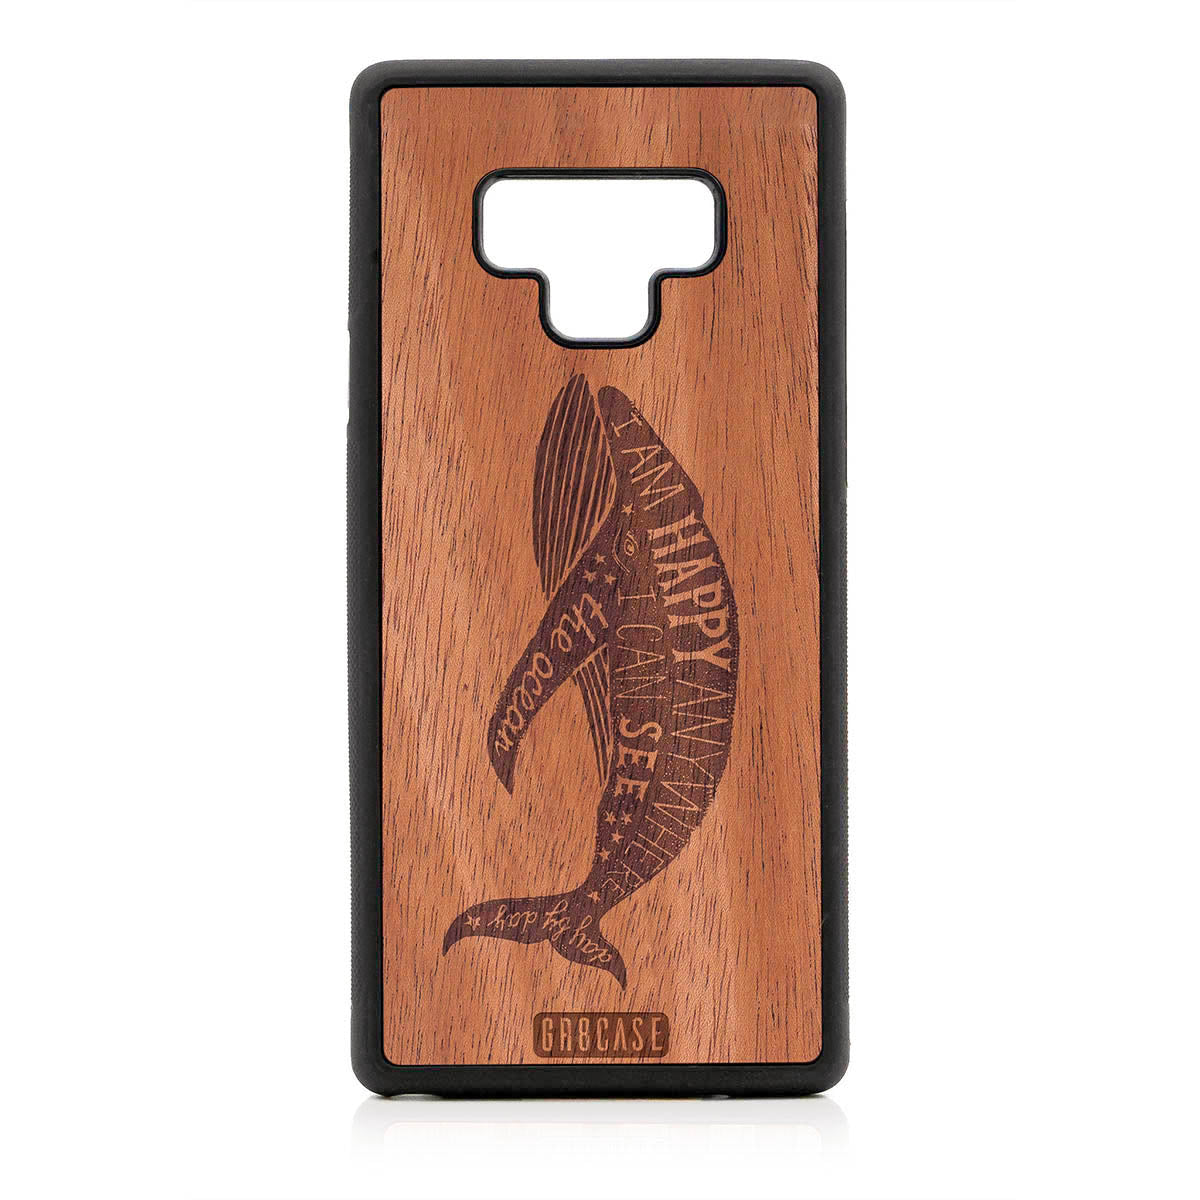 I'm Happy Anywhere I Can See The Ocean (Whale) Design Wood Case For Samsung Galaxy Note 9